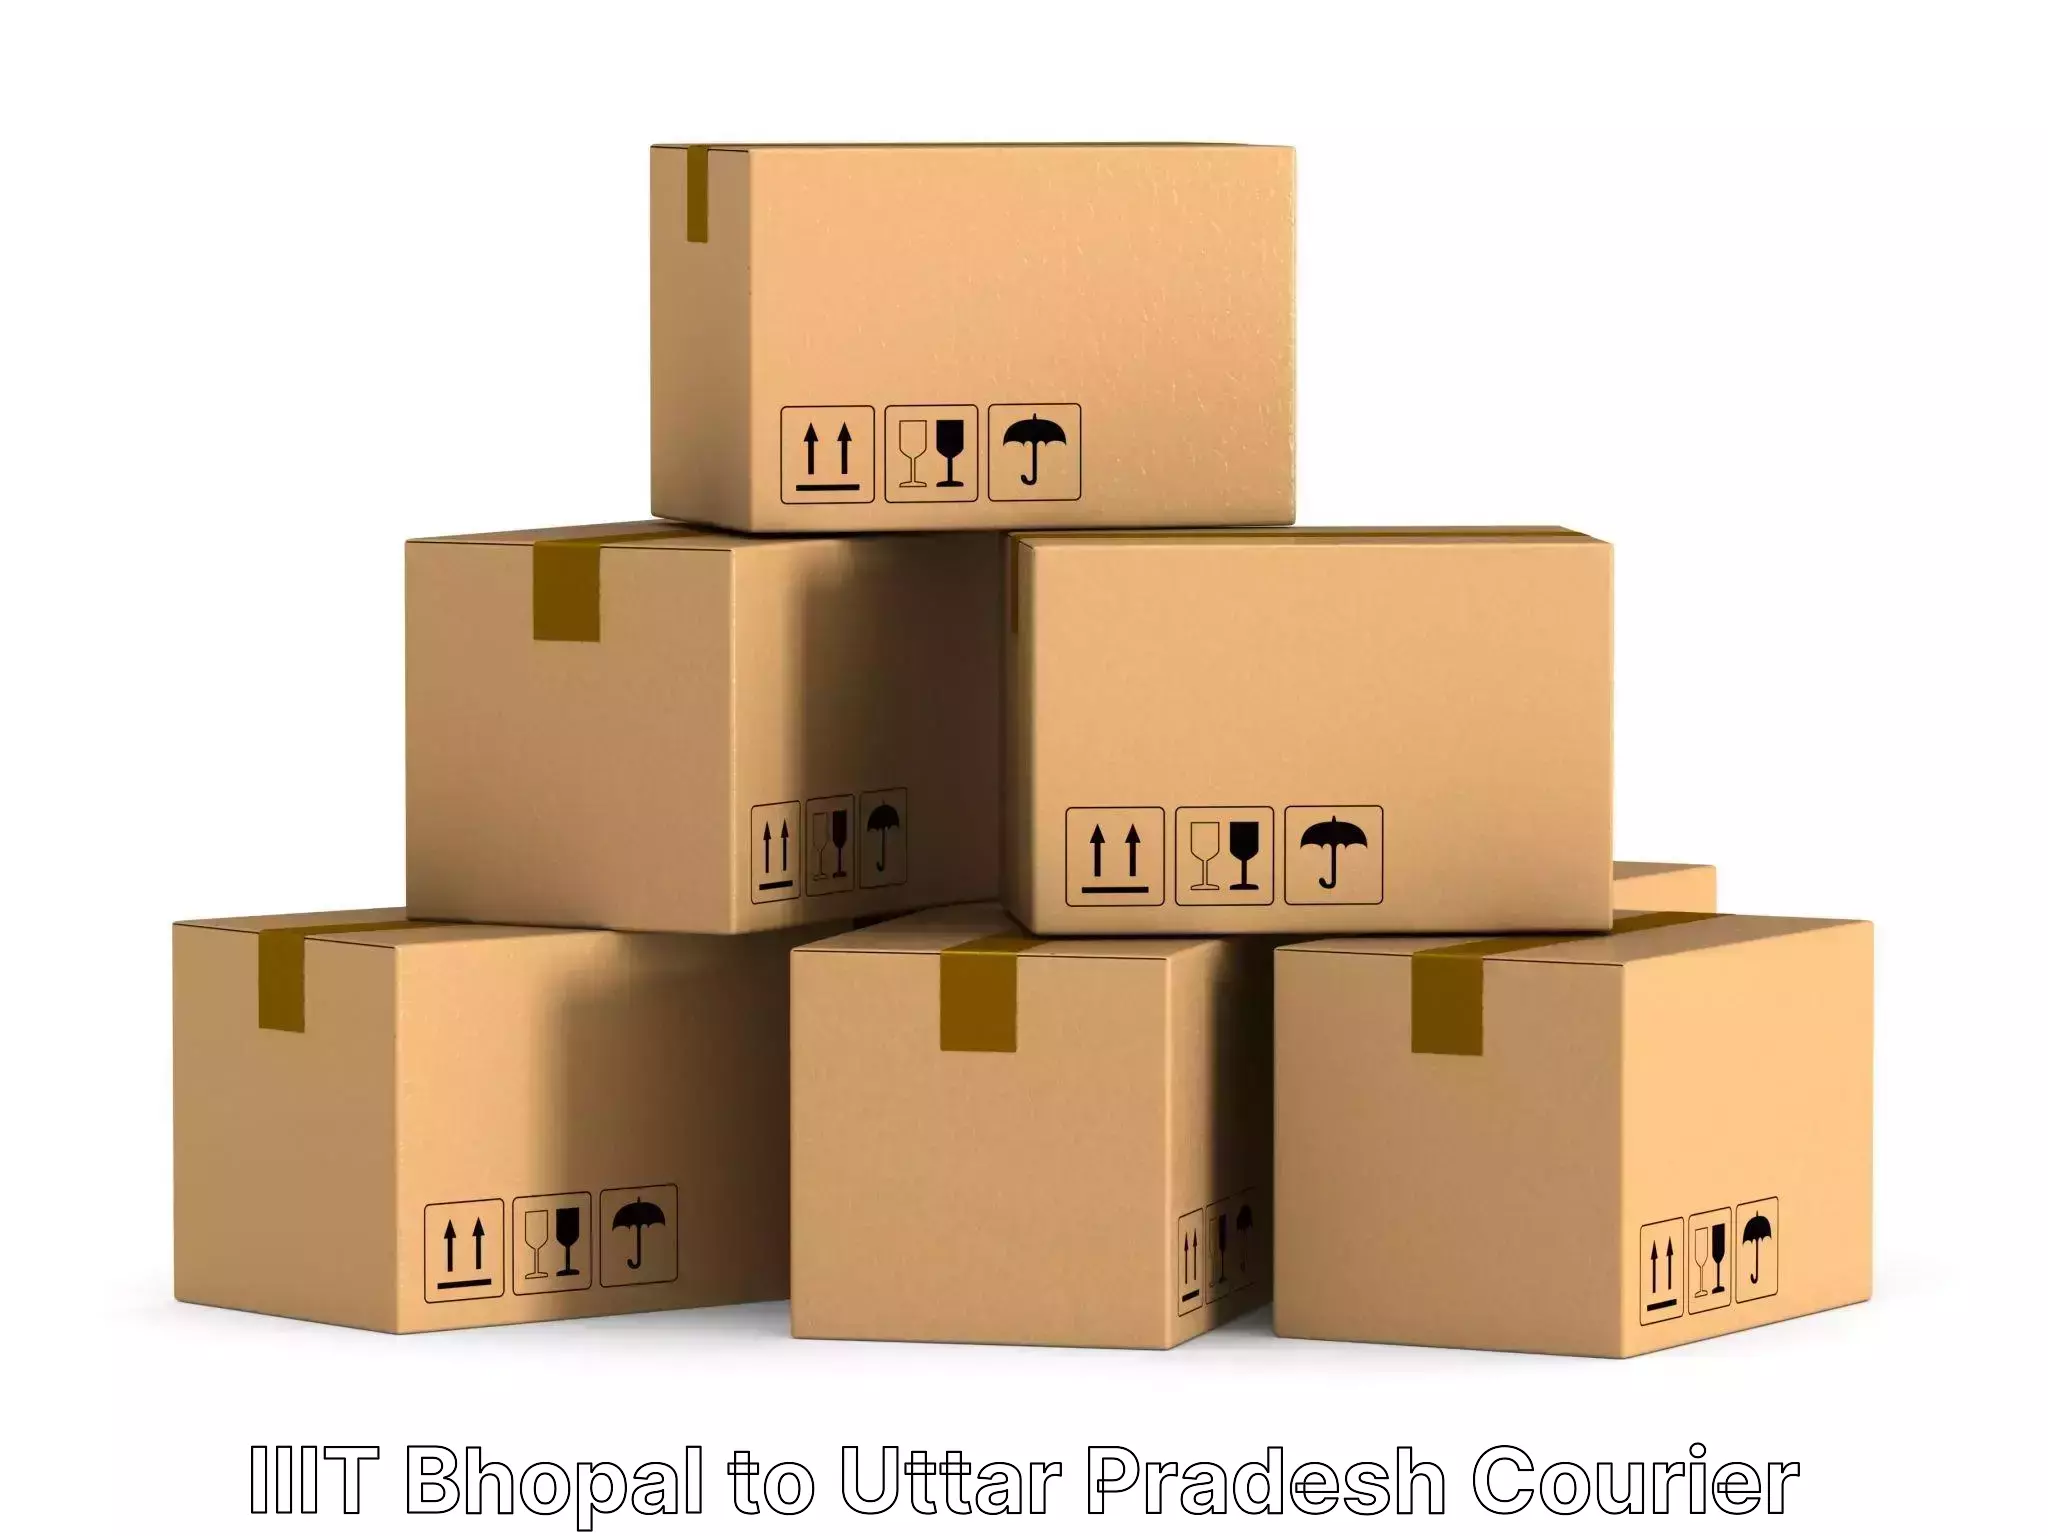 Furniture delivery service IIIT Bhopal to Chandpur